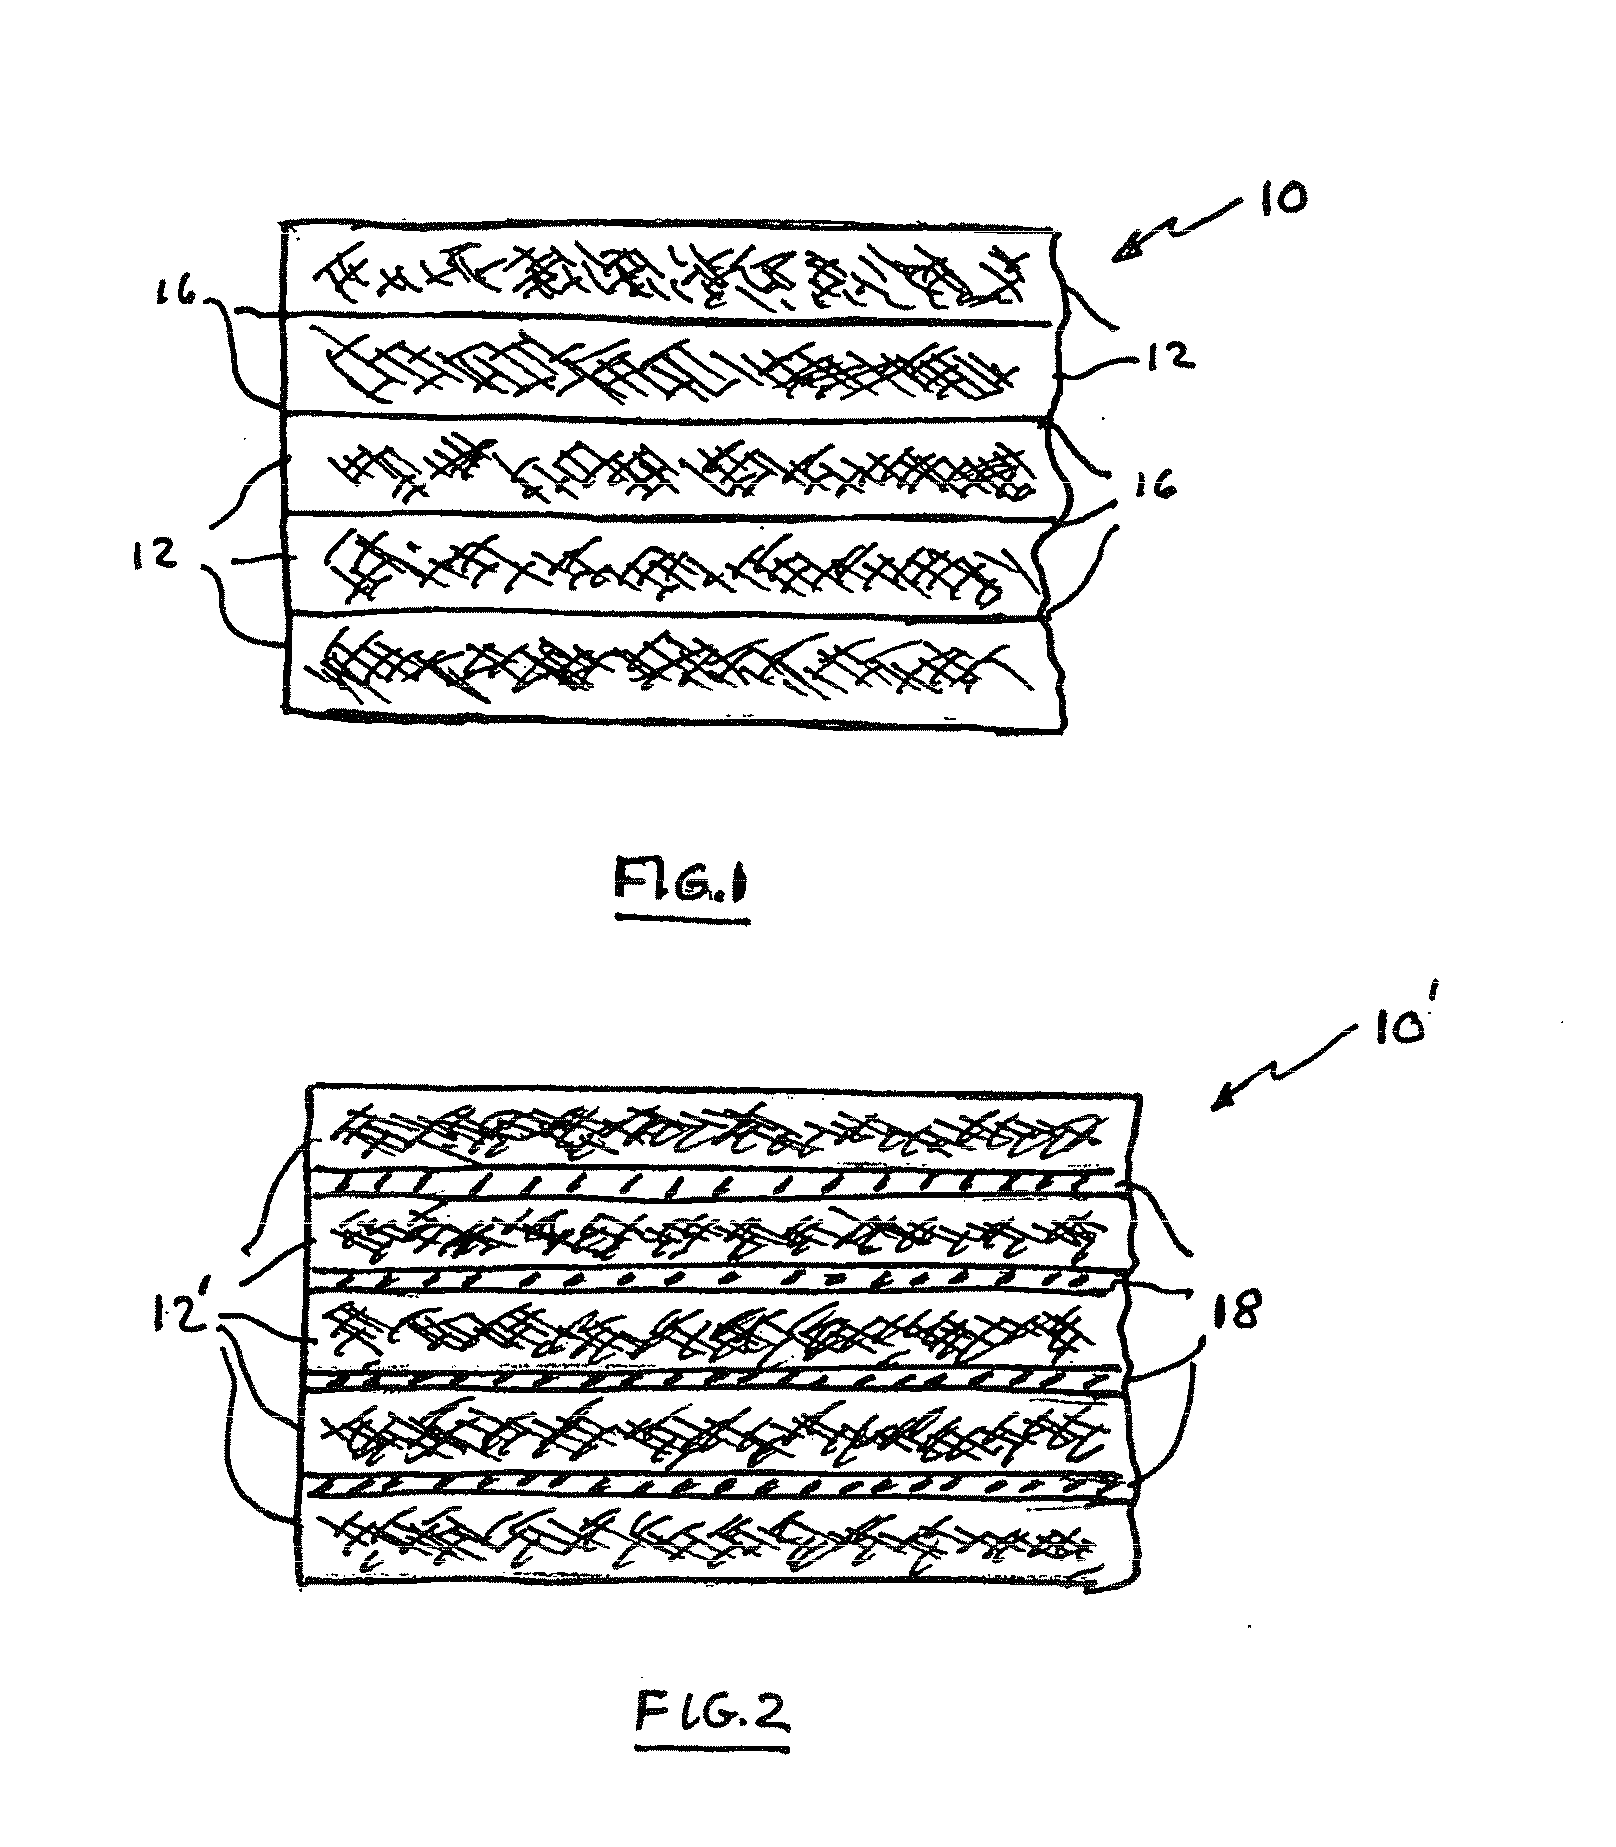 Planar Elements for Use in Papermaking Machines